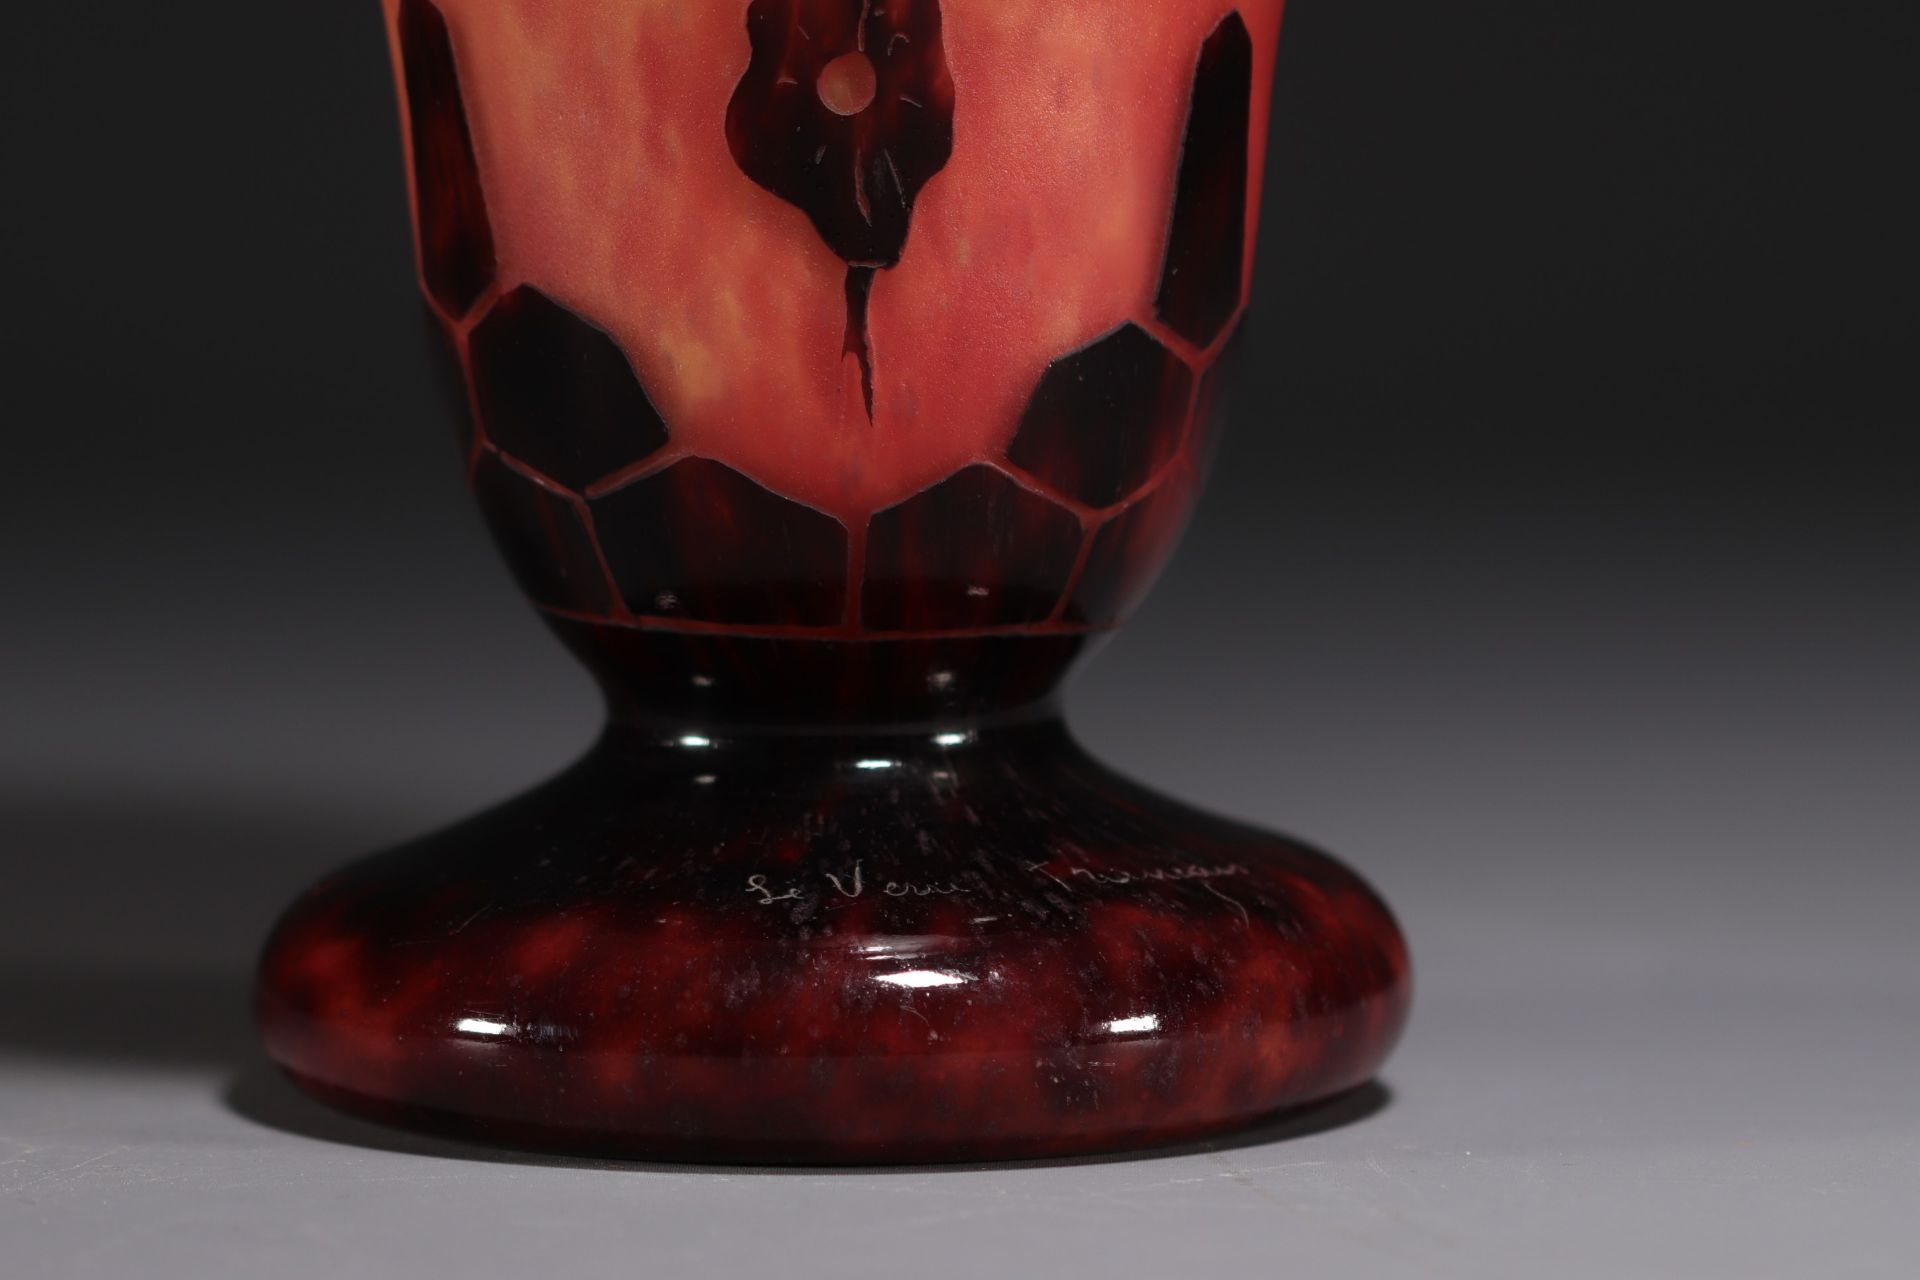 Le Verre Francais - Acid-etched multi-layered glass vase with oak decor, signed on the base. - Image 4 of 4